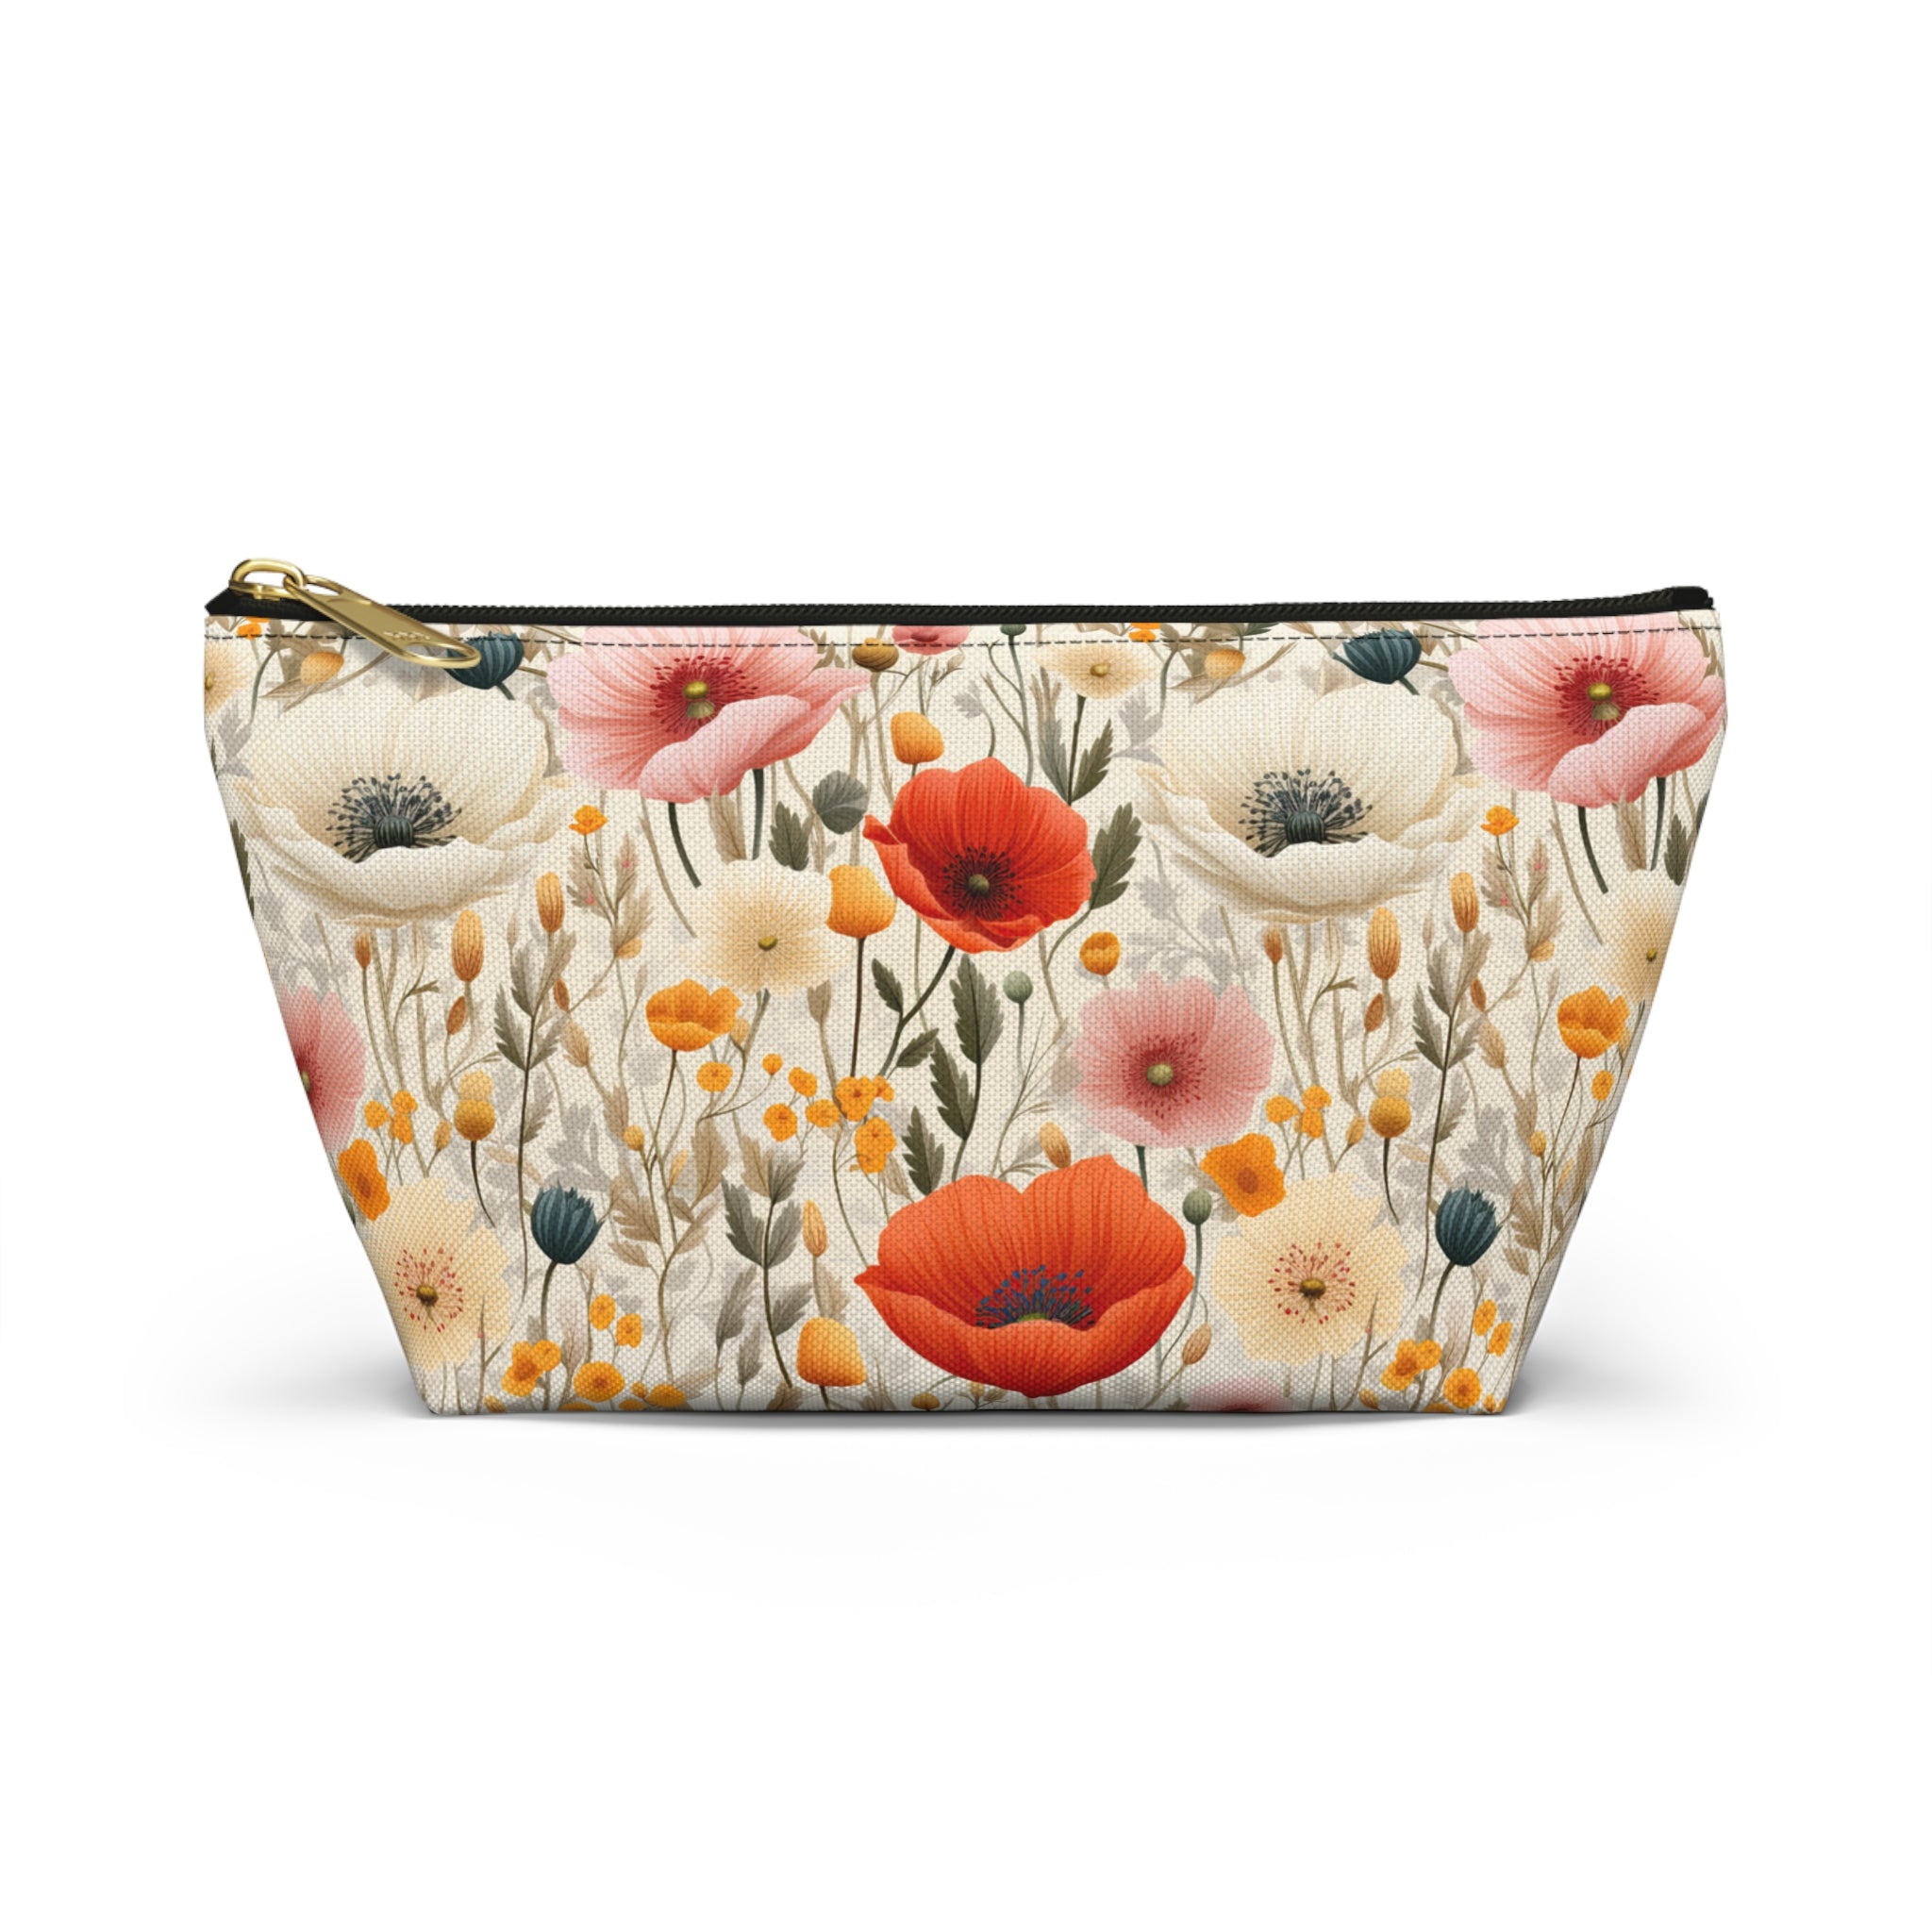 Poppy Love Pouch, Poppy Pouch, Floral Pouch, Cute Pouch, Floral